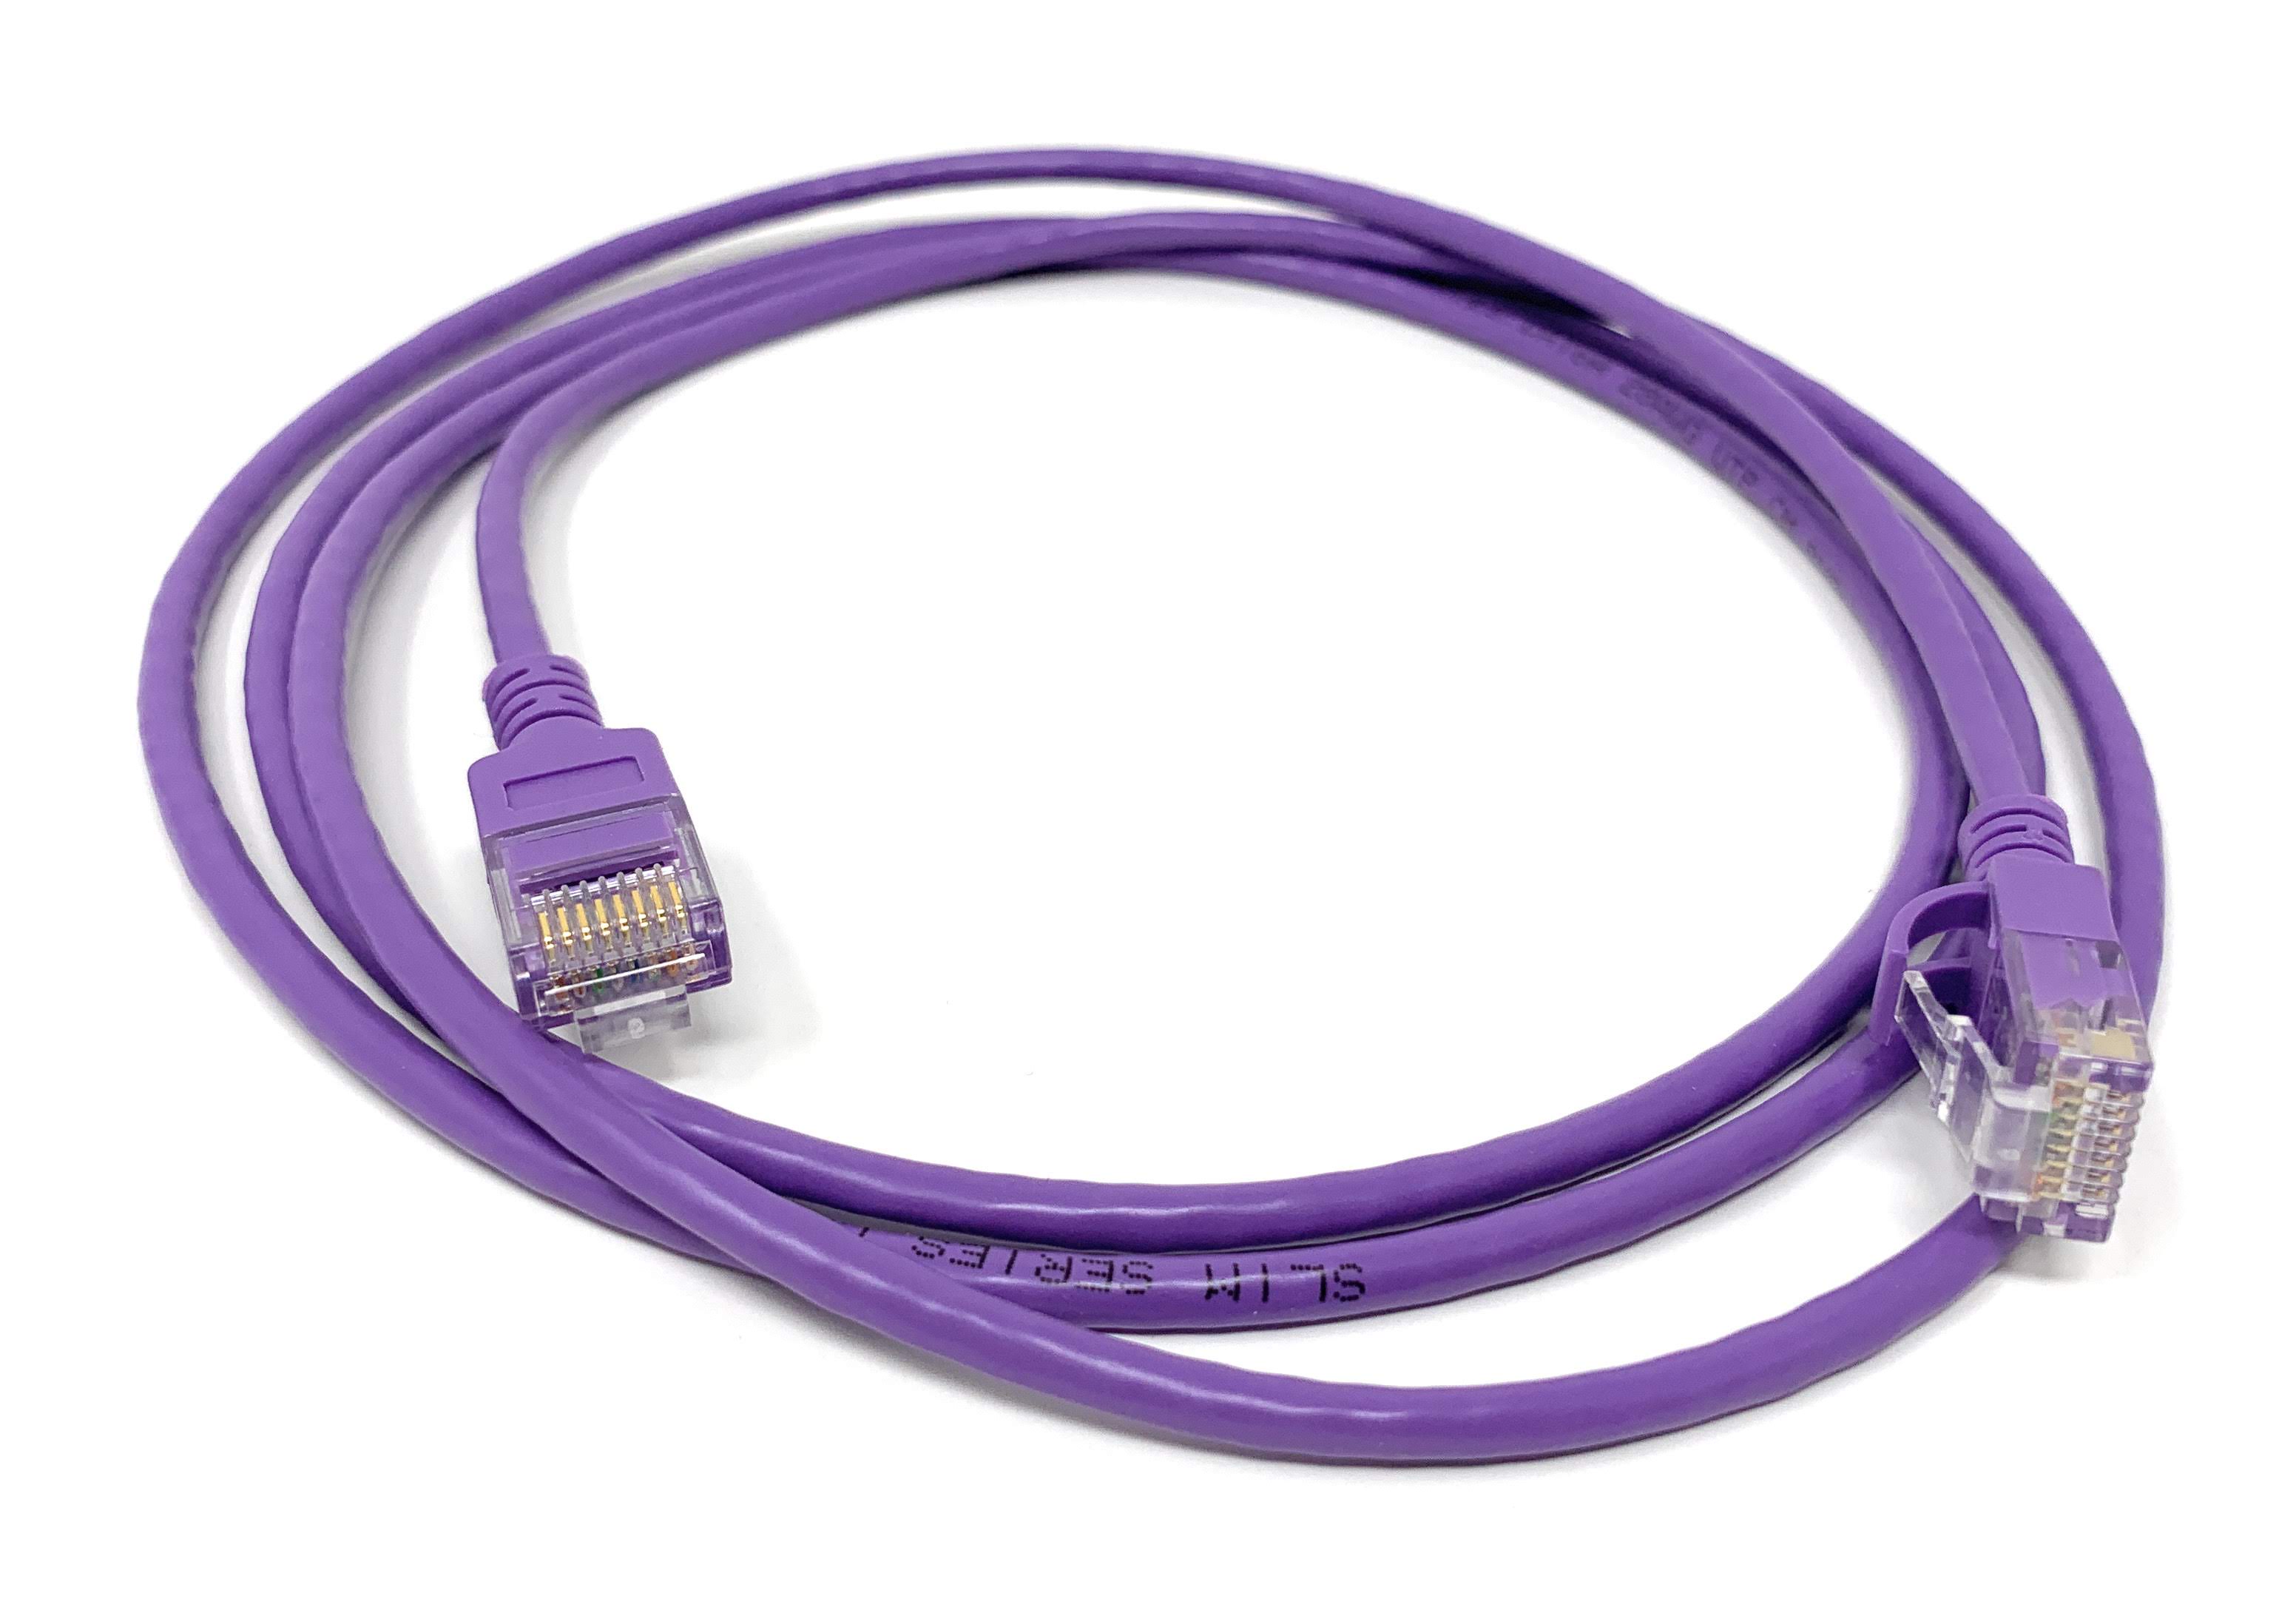 Category 6a 28awg Patch Cables with Slim Jacket- 5 Feet